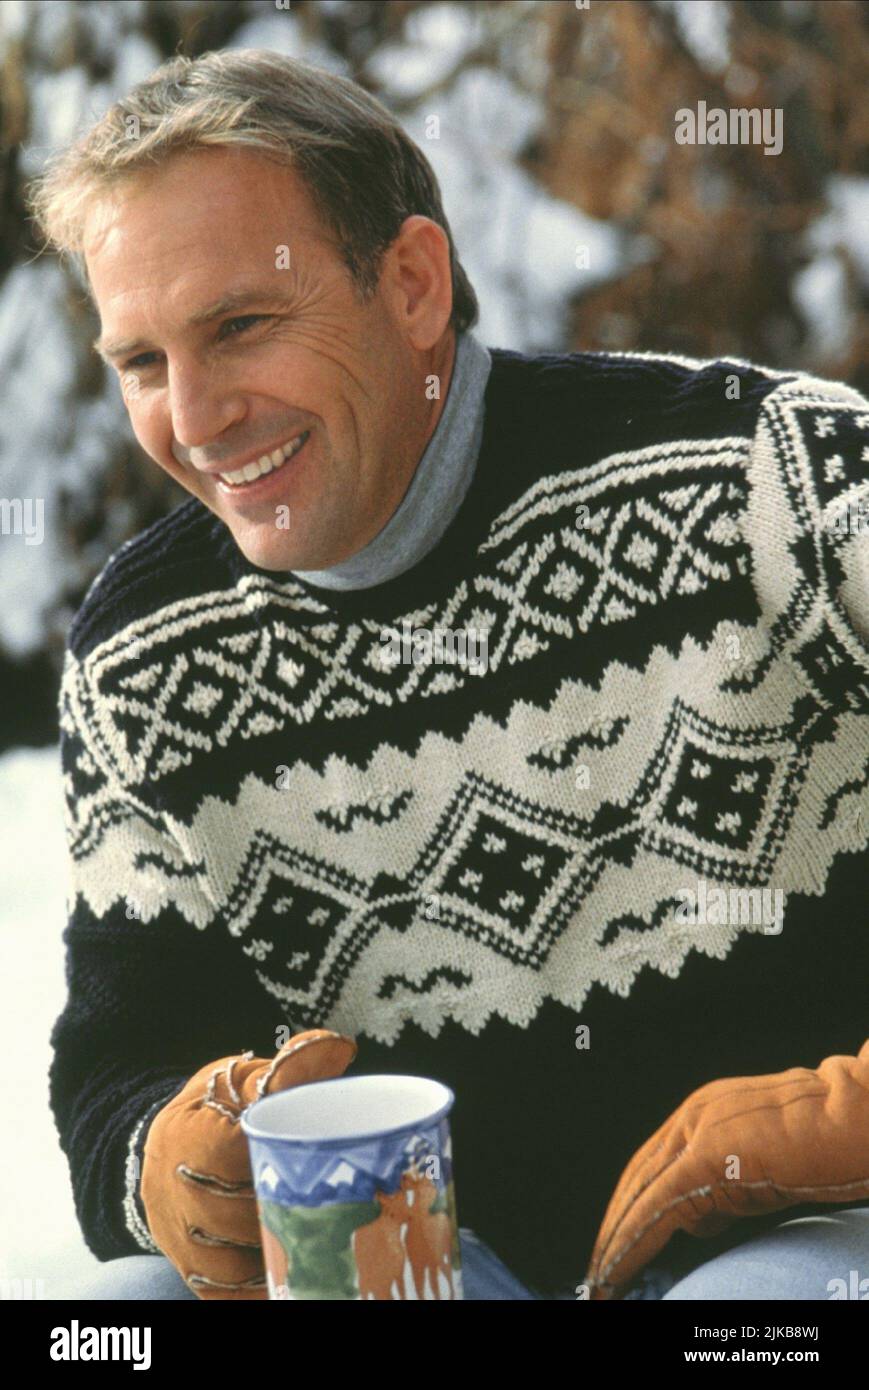 Kevin Costner For Love of the Game Posters and Photos 168667